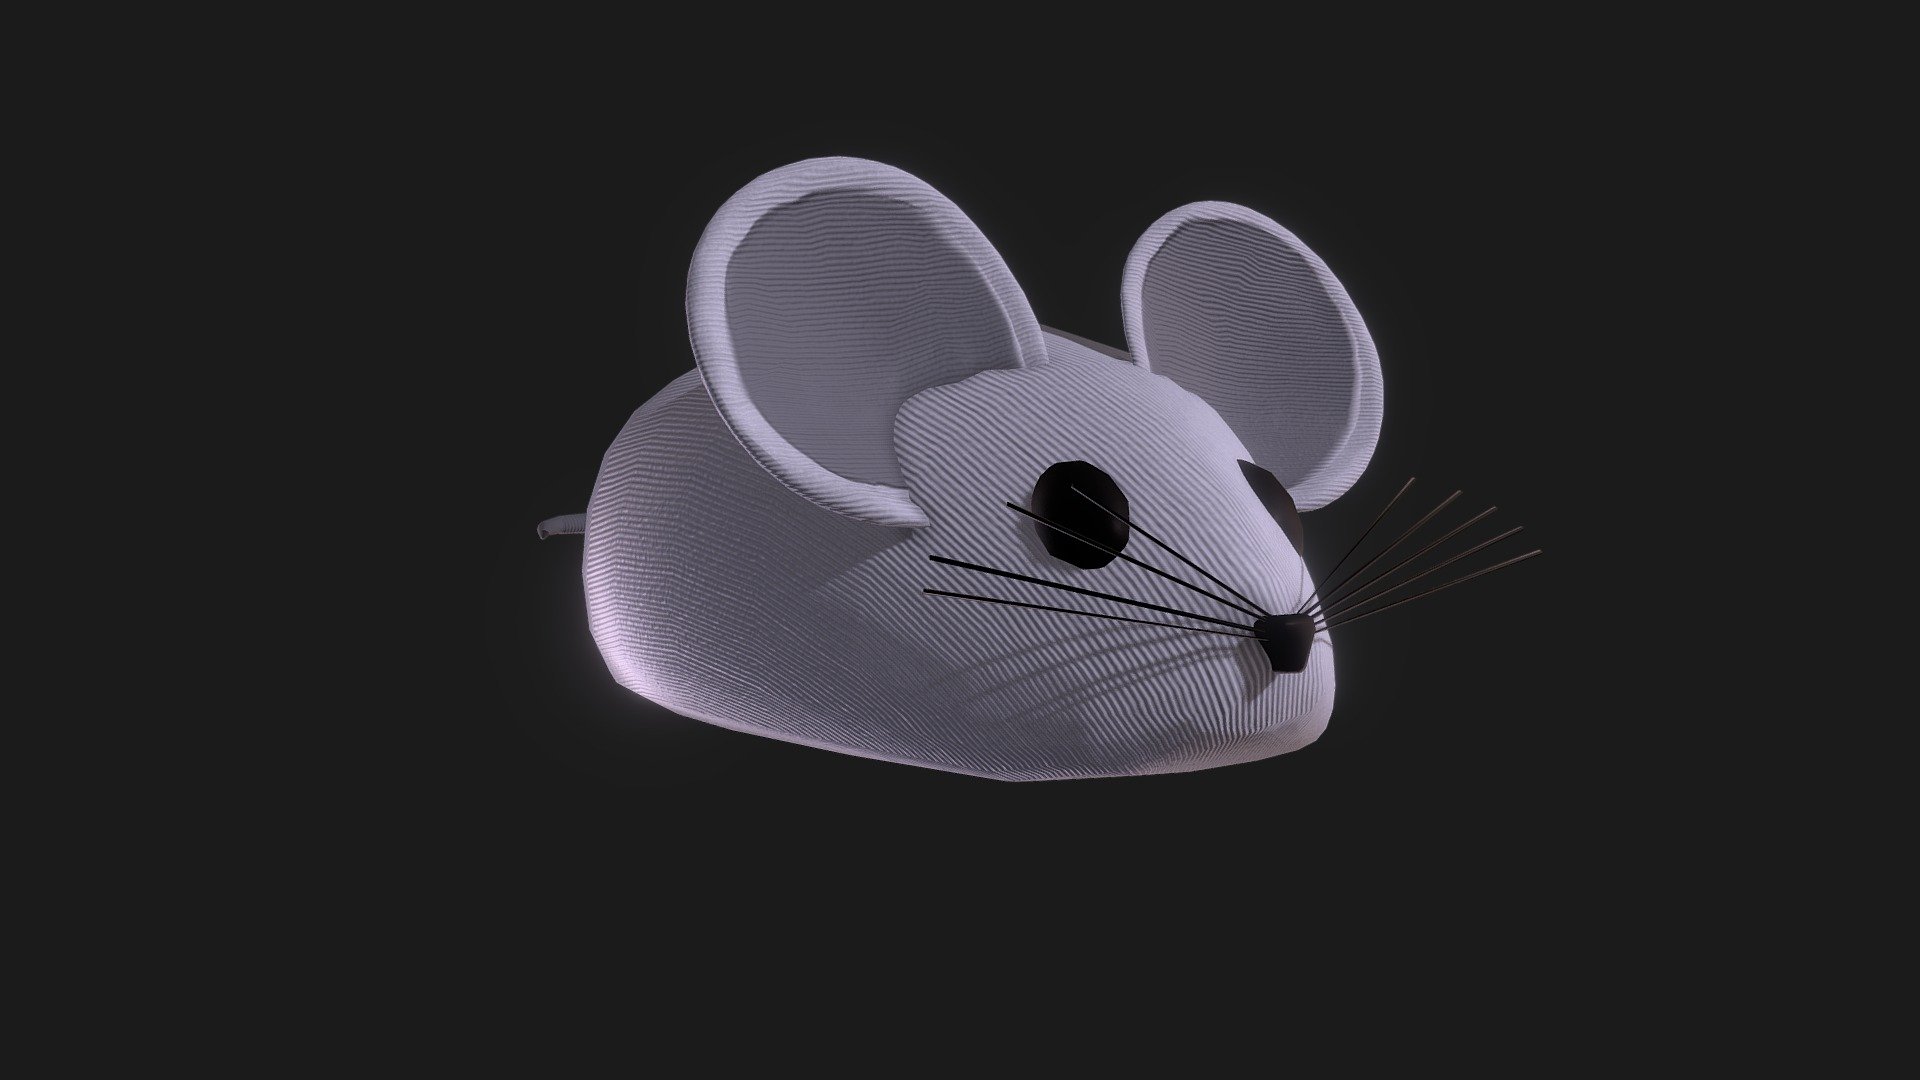 A rigged mouse that was used for a hackathon 3d model